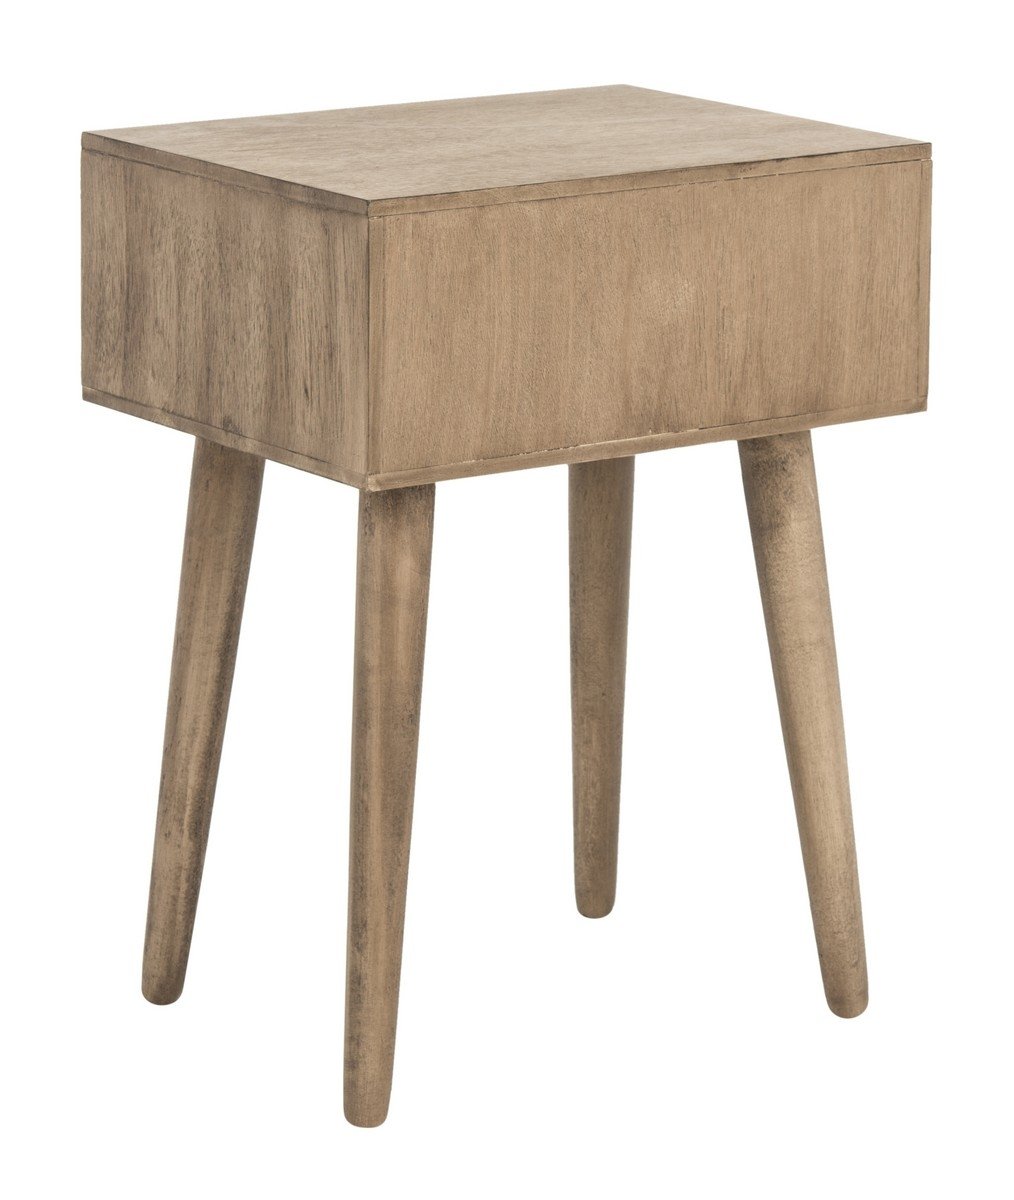 Makara Accent Table, Chocolate - Image 2